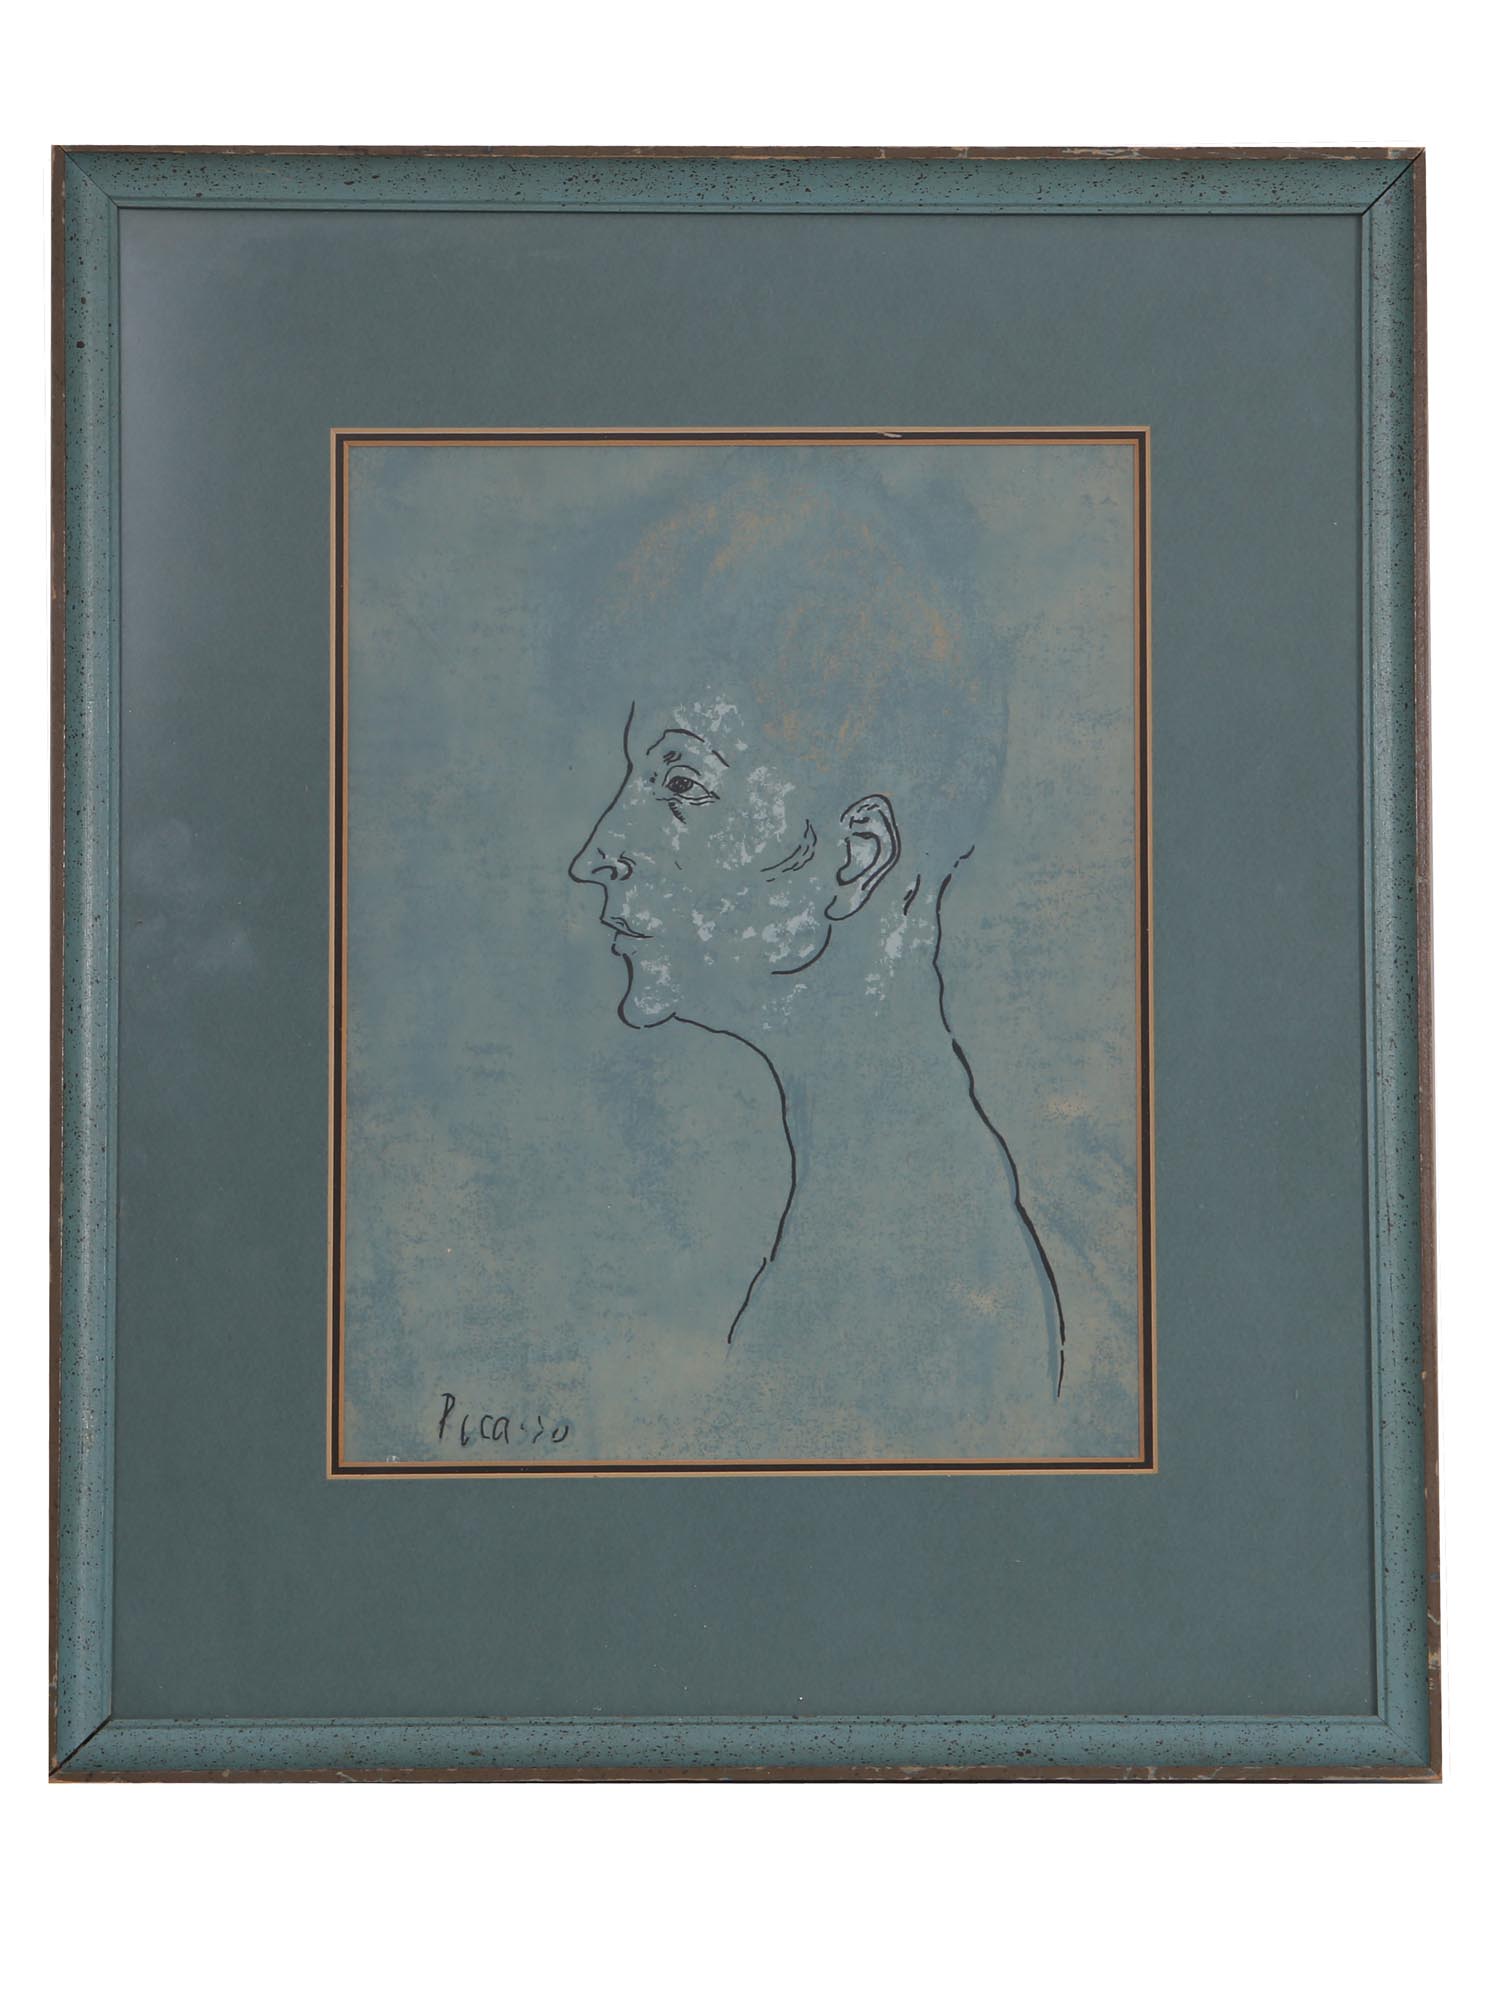 A LITHOGRAPH BY PABLO PICASSO BLUE PERIOD SIGNED